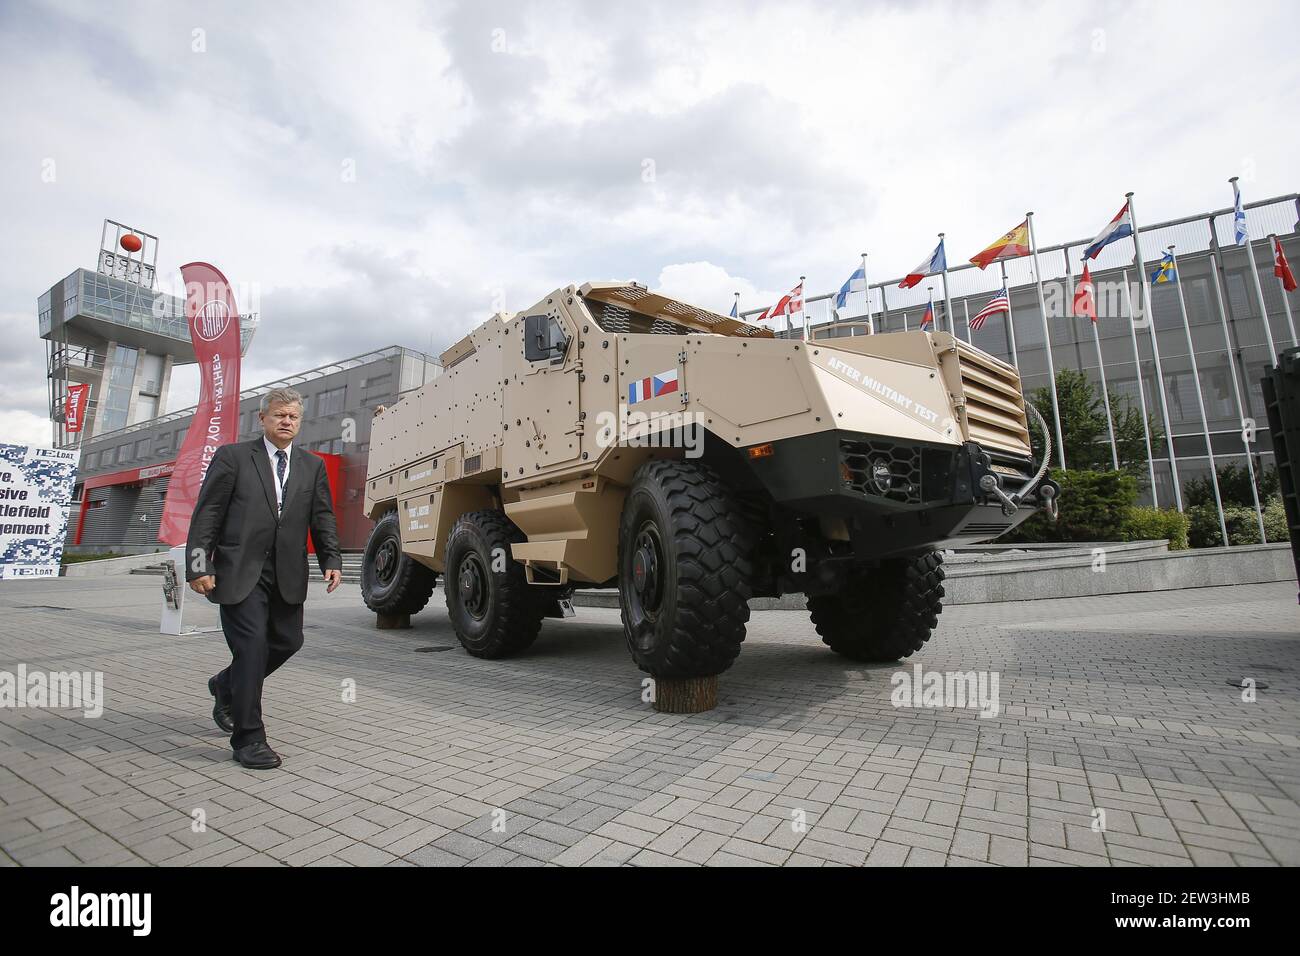 A visitor walks past a Titus Armoured Personnel Carrier (APC) during the 25th International Defence Industry Exhibition in Kielce, Poland on September 8, 2017. The Kielce exhibition is the largest of its kind in Central and Eastern Europe. (Photo by Jaap Arriens/Sipa USA) Stock Photo